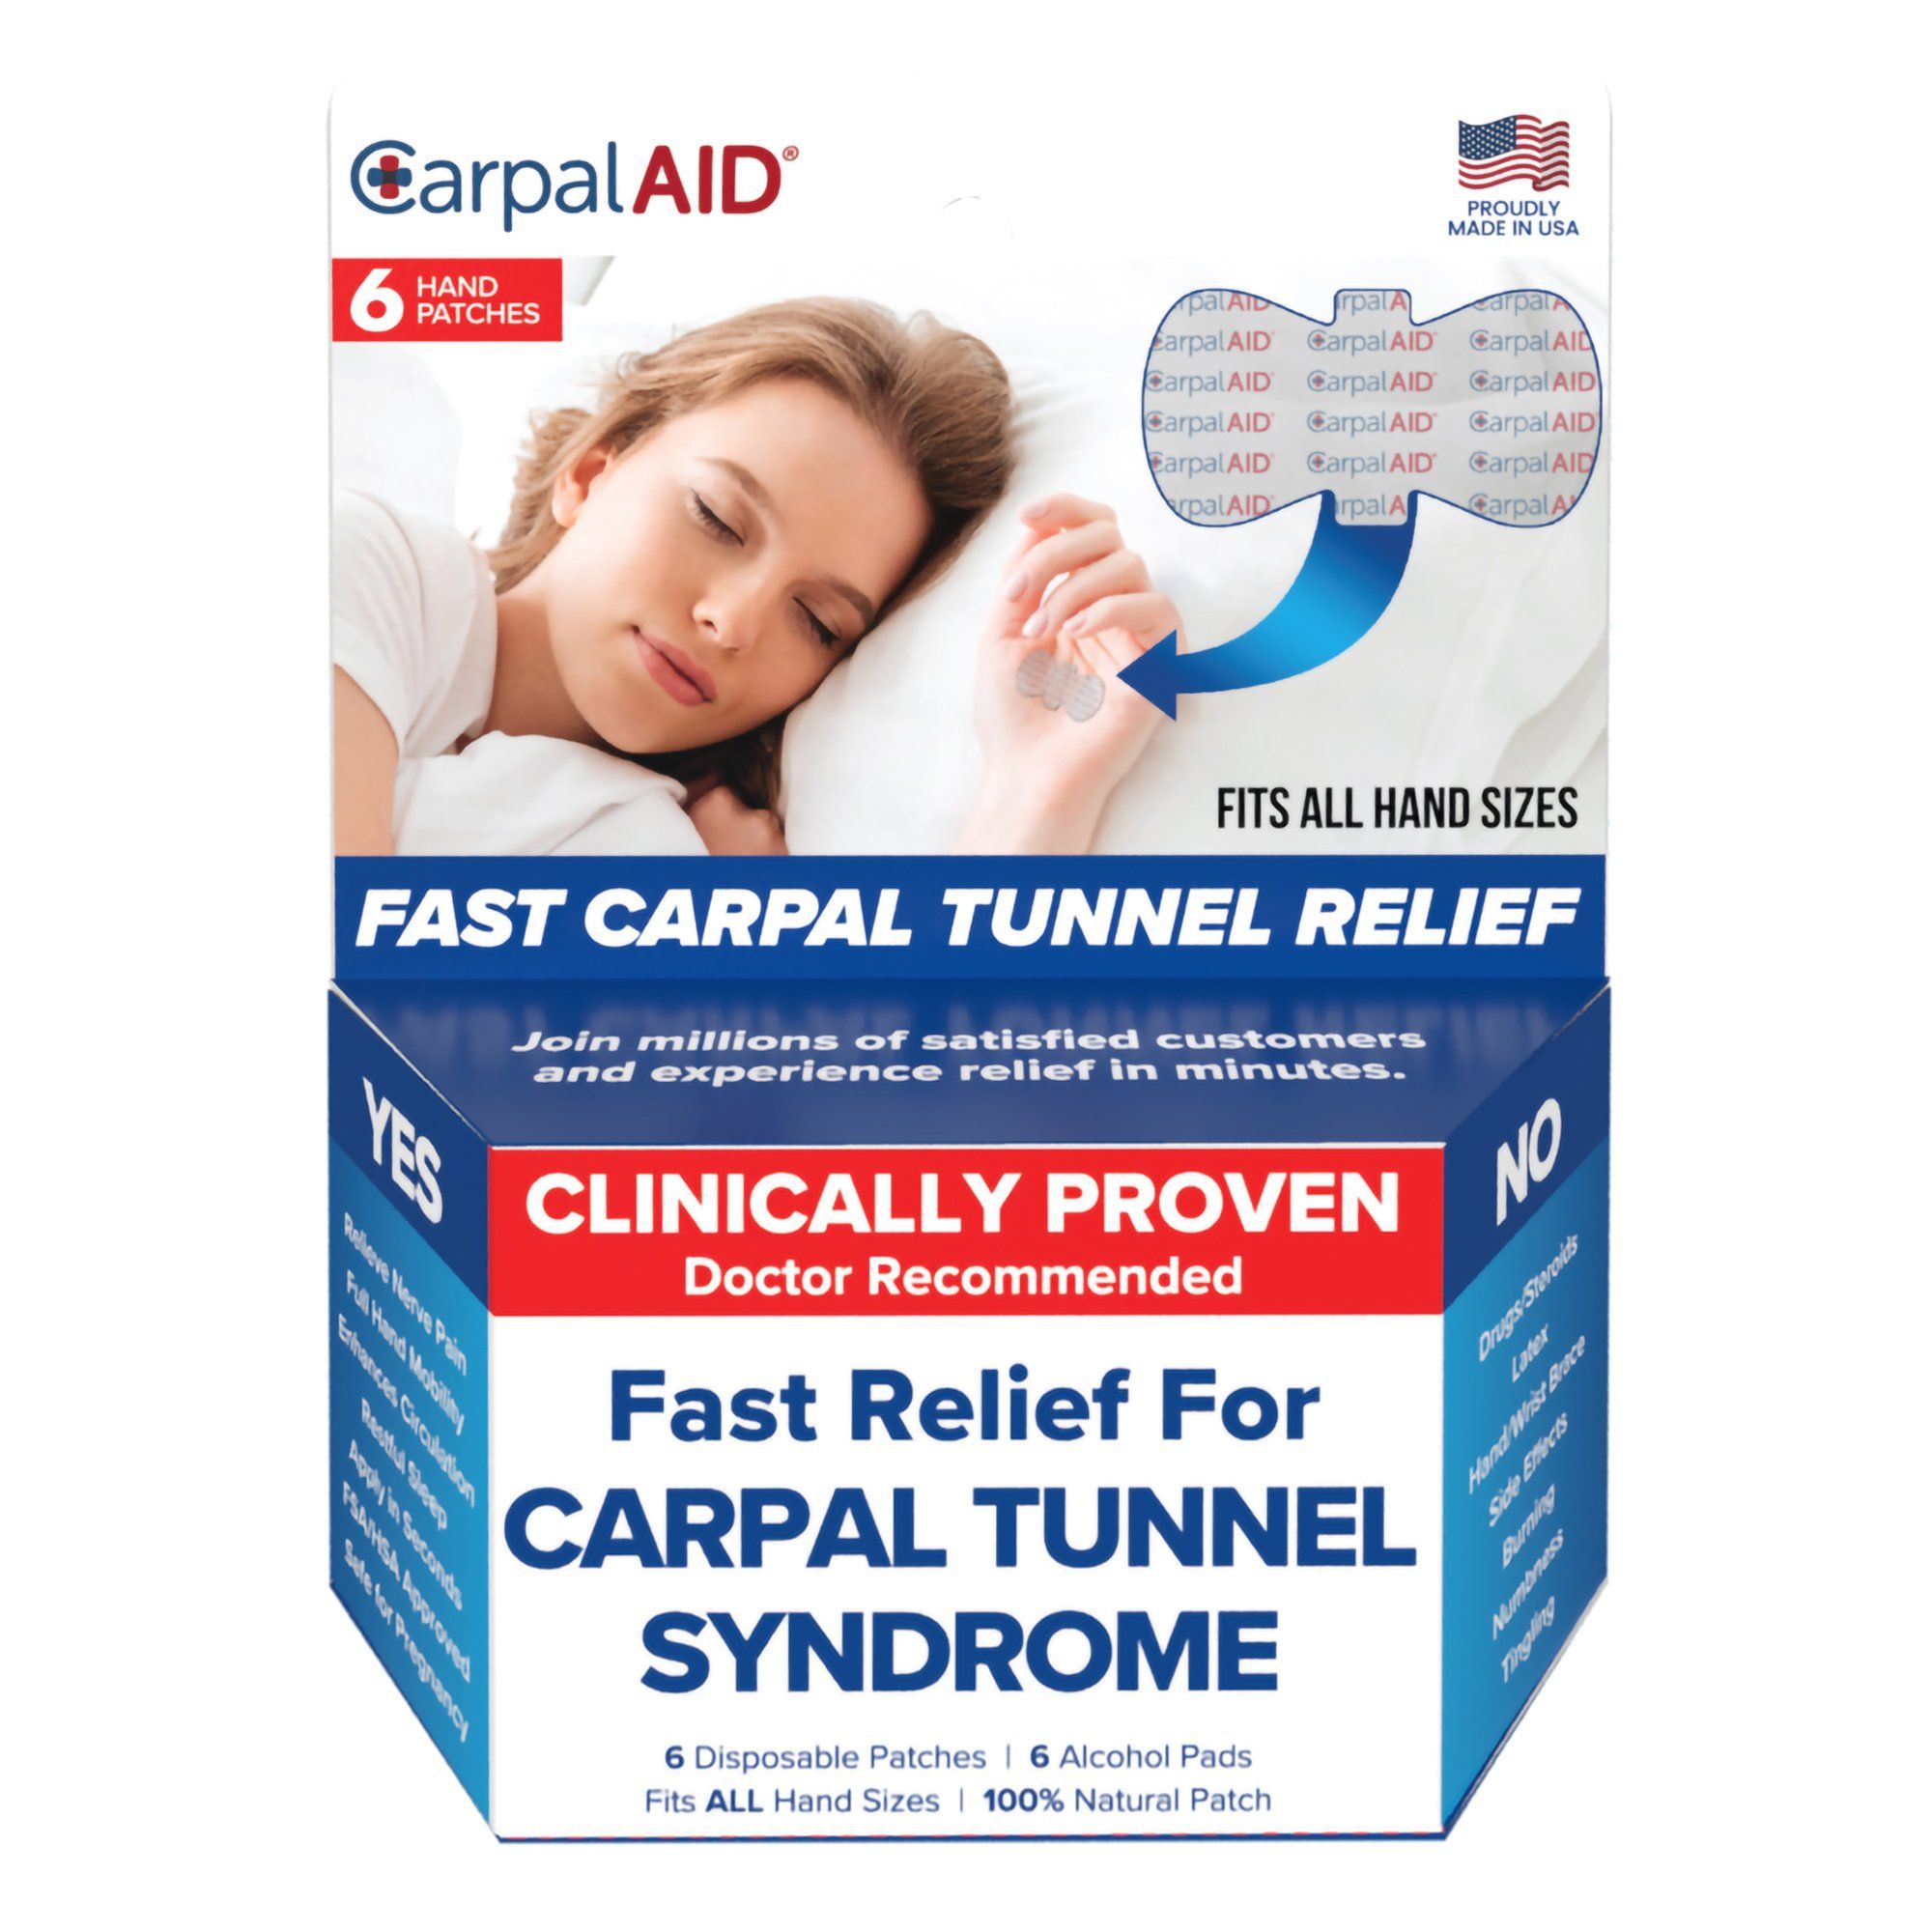 Carpal AID Clear Adhesive Hand-Based Carpal Tunnel Support Patches, Universal -  One Size Fits Most - 6 ct